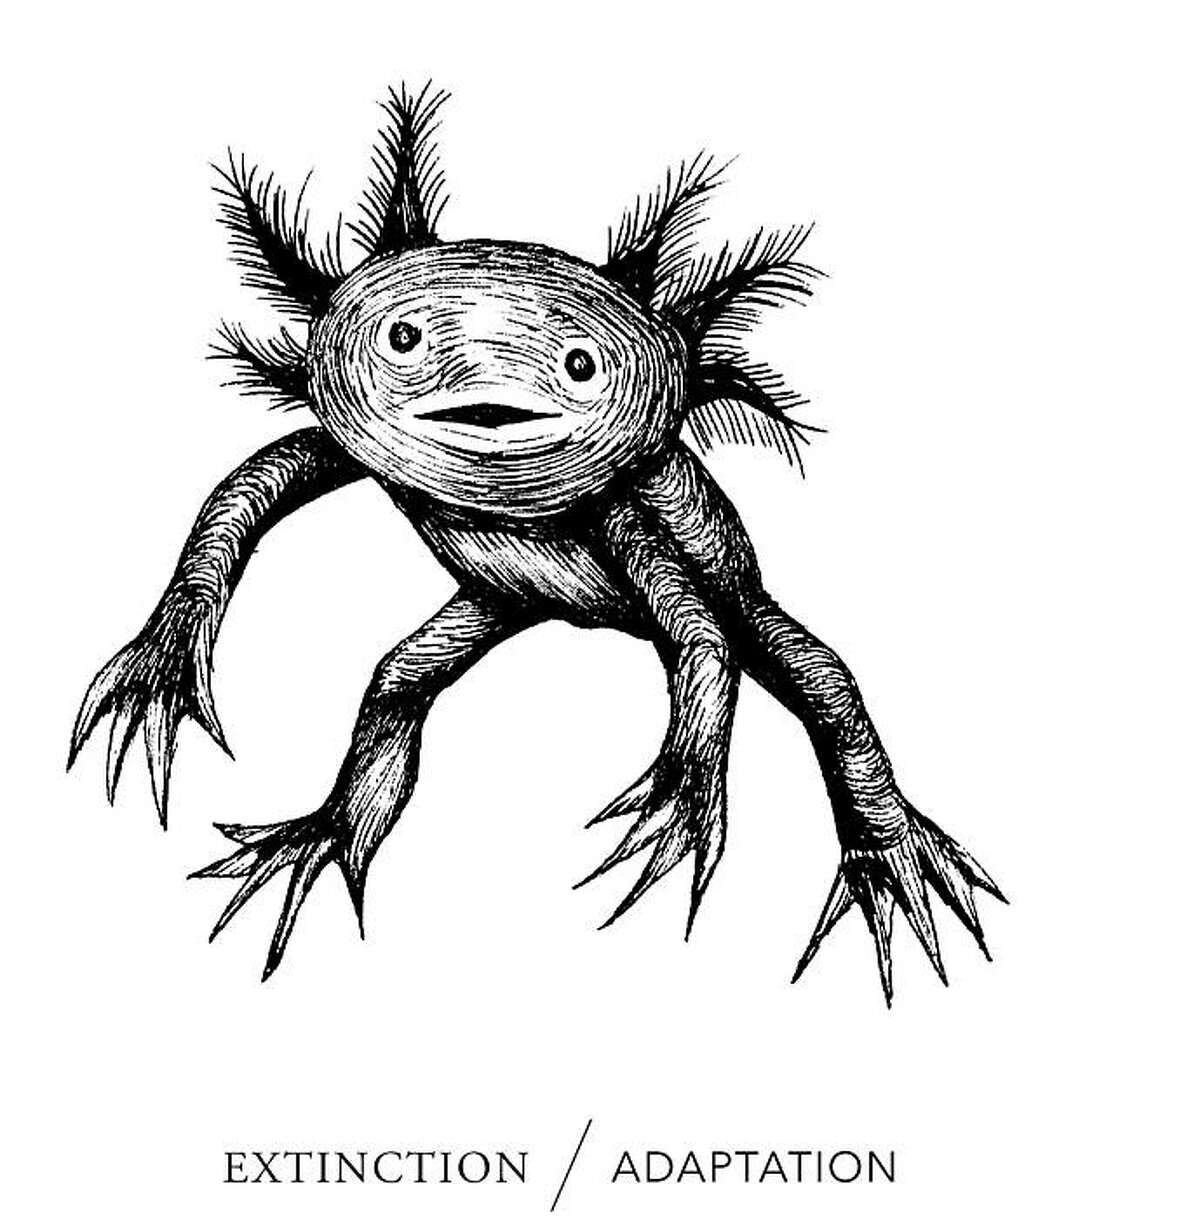 This illustration is the cover of a book called "Extinction/Adaptation," which spotlights some of the things that are going extinct or ways in which humans are adapting to a changed environment.